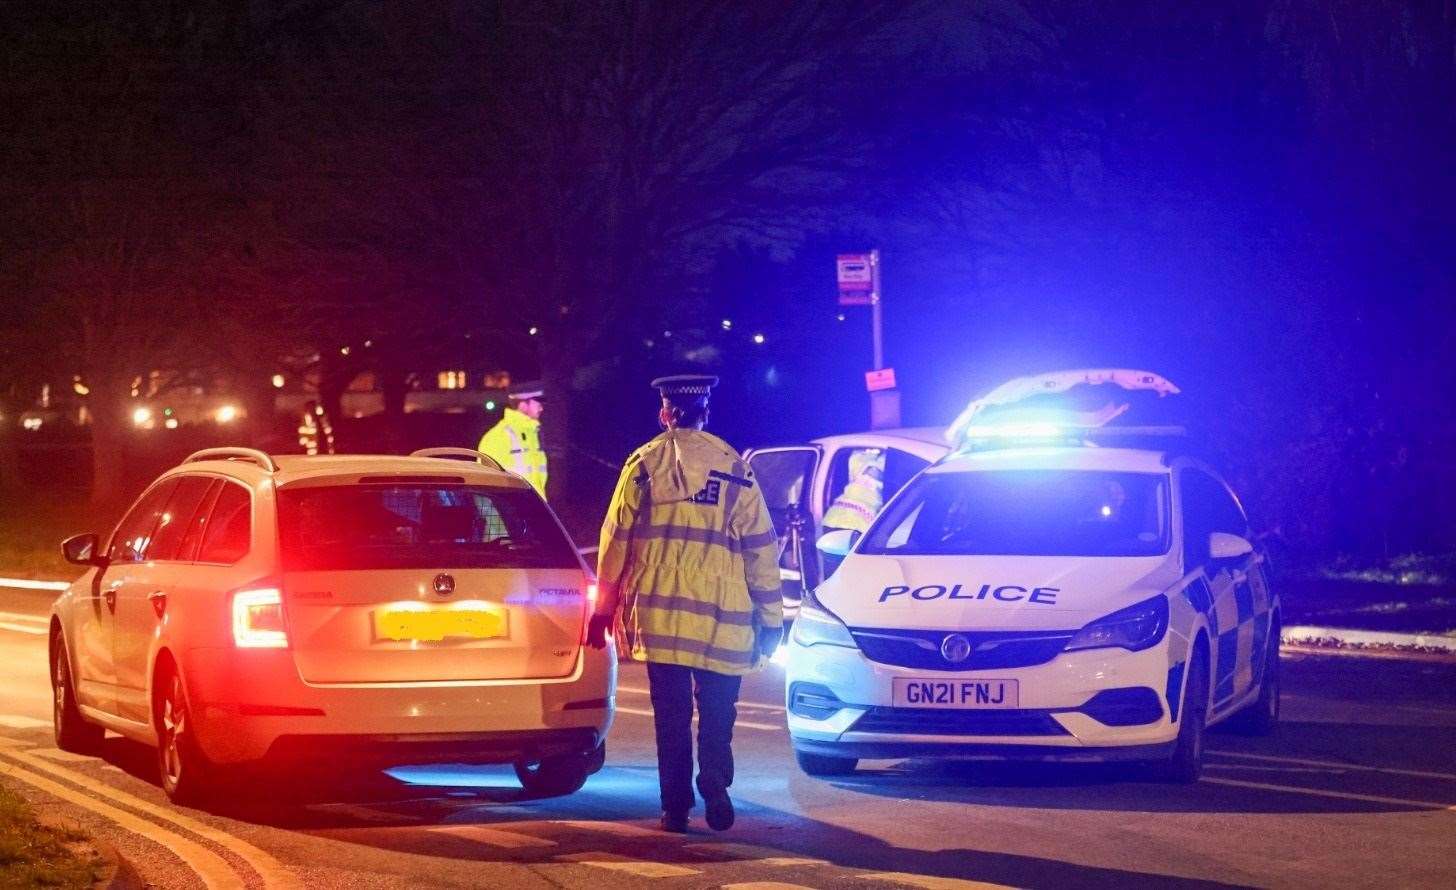 Police at the scene of the crash at Leysdown on Tuesday night. Picture: UKNIP (61164208)